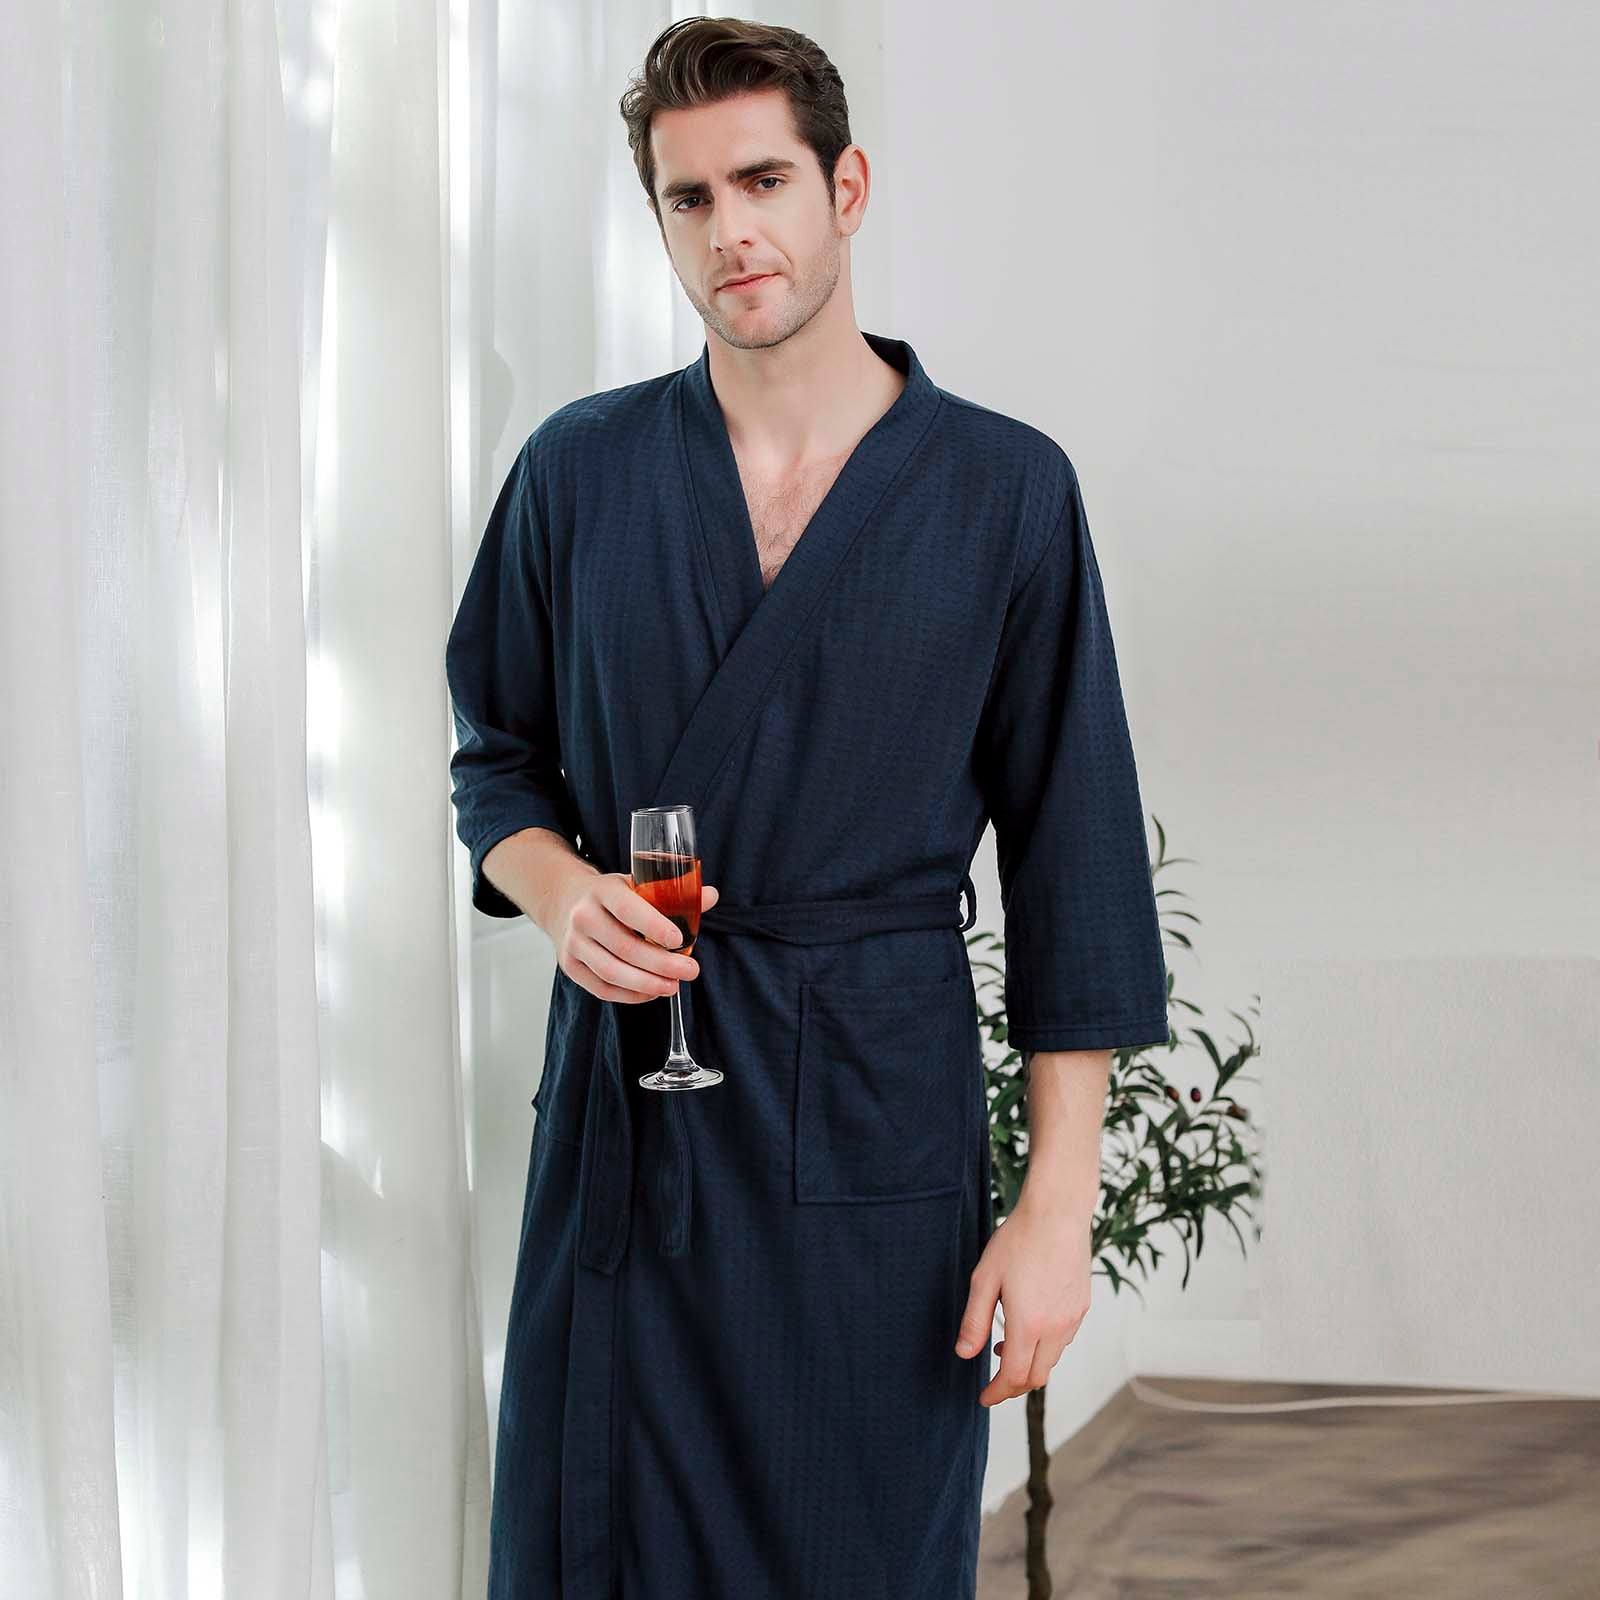 Buy Bath Robes Online In India At Affordable Prices | Tata CLiQ